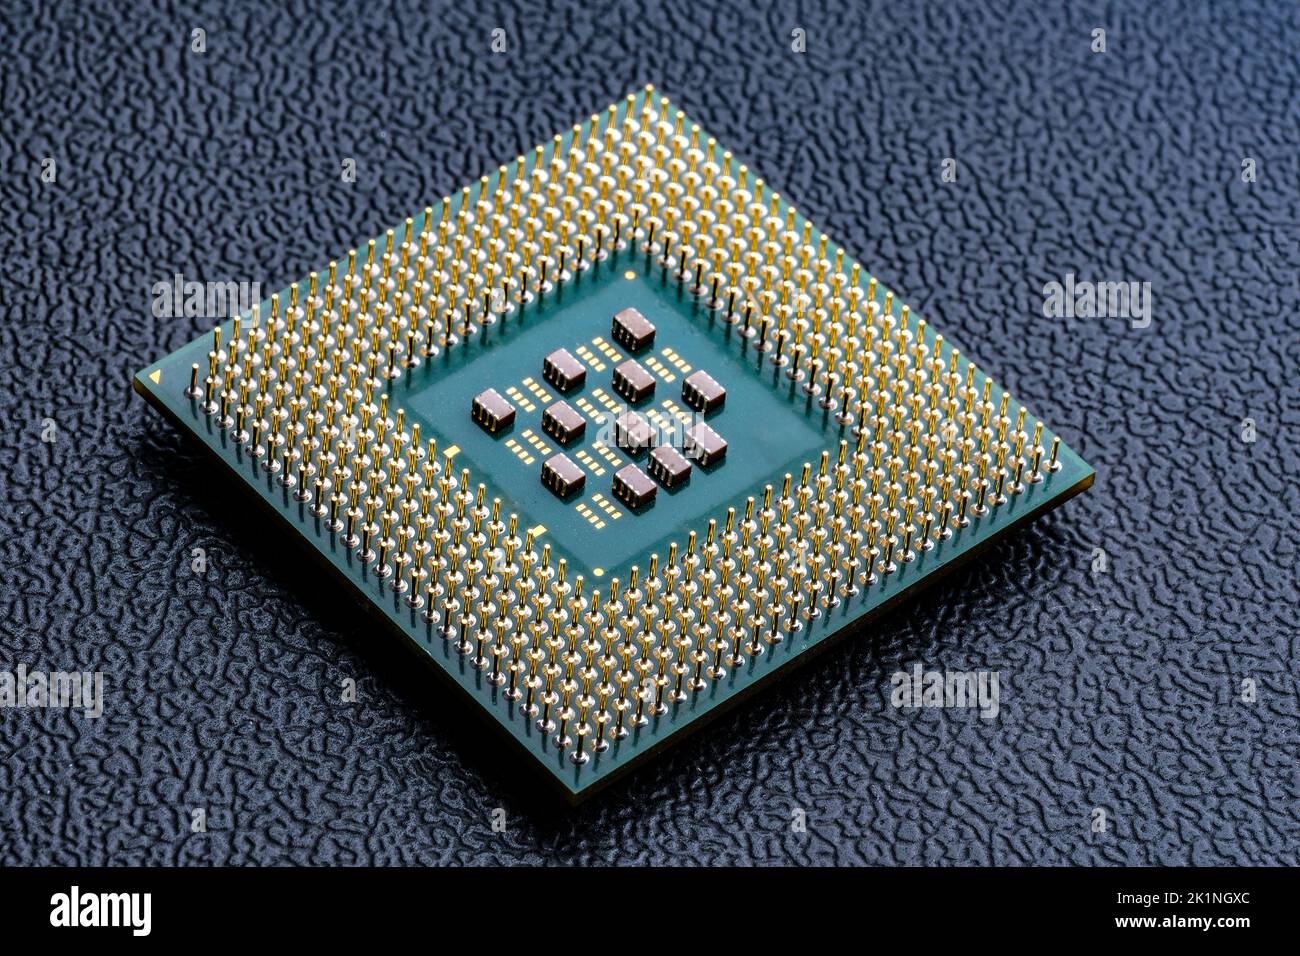 Large computer chip CPU with hundreds of gold pins and tiny components - capacitors, resistors on its board. Concept for microchips and semiconductor Stock Photo